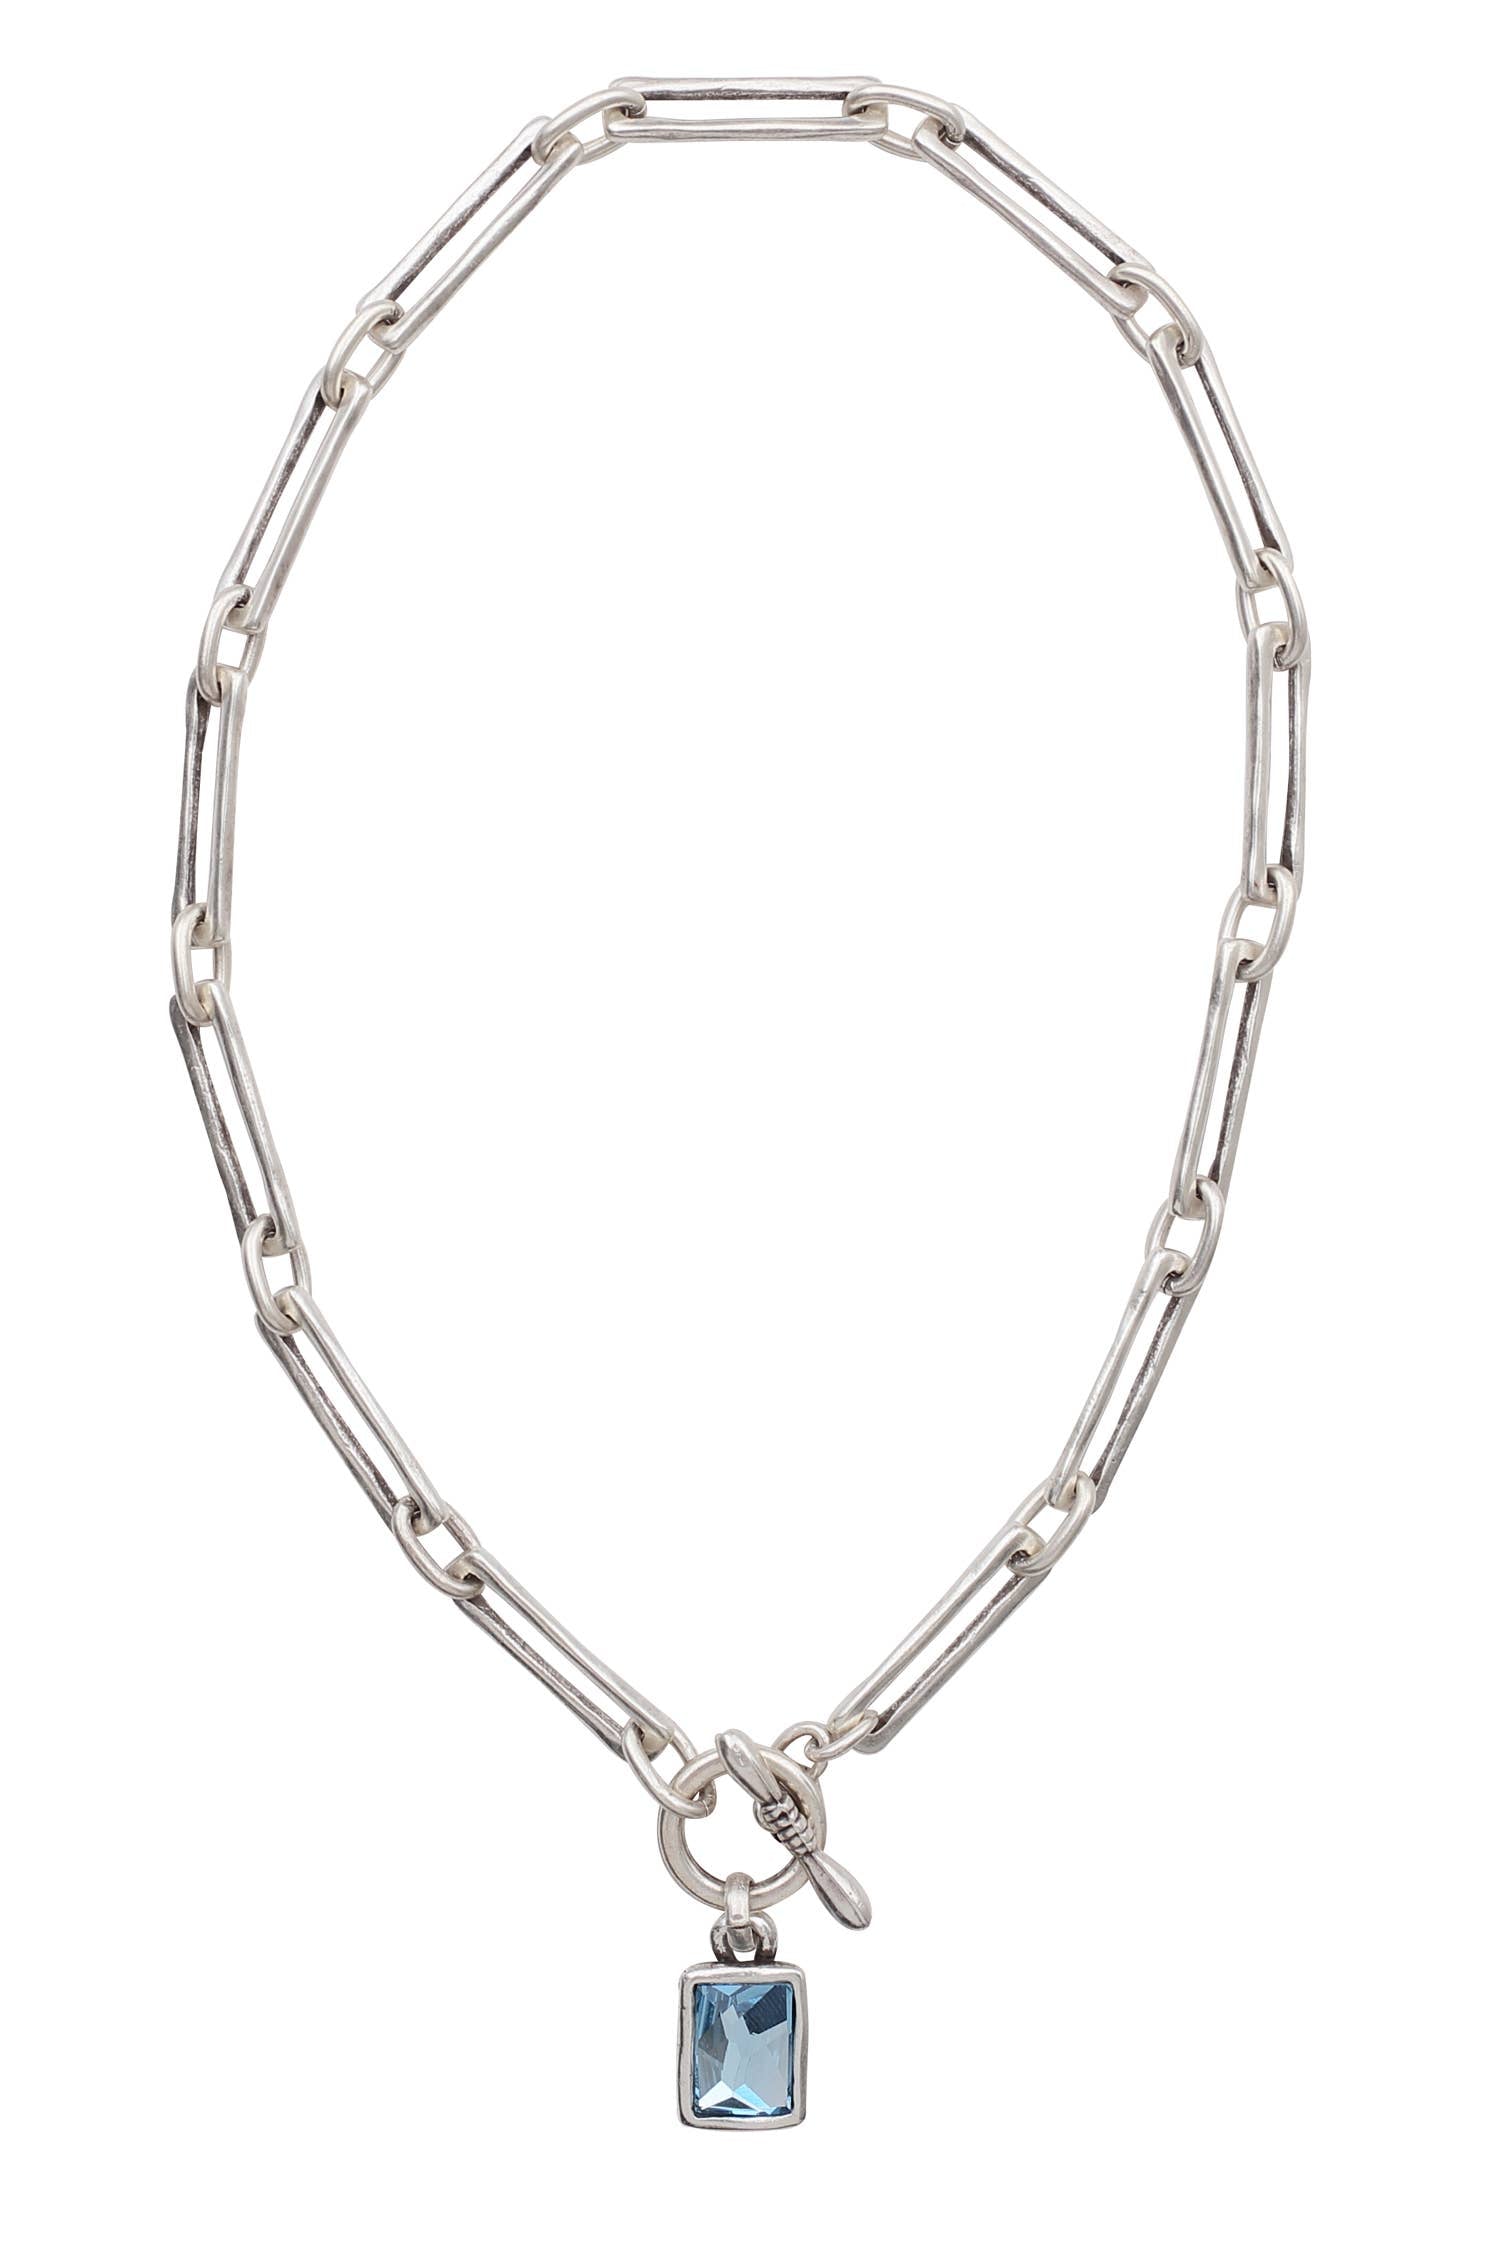 The Victoria Handmade Crystal Pewter Necklace - Coco and lulu boutique 